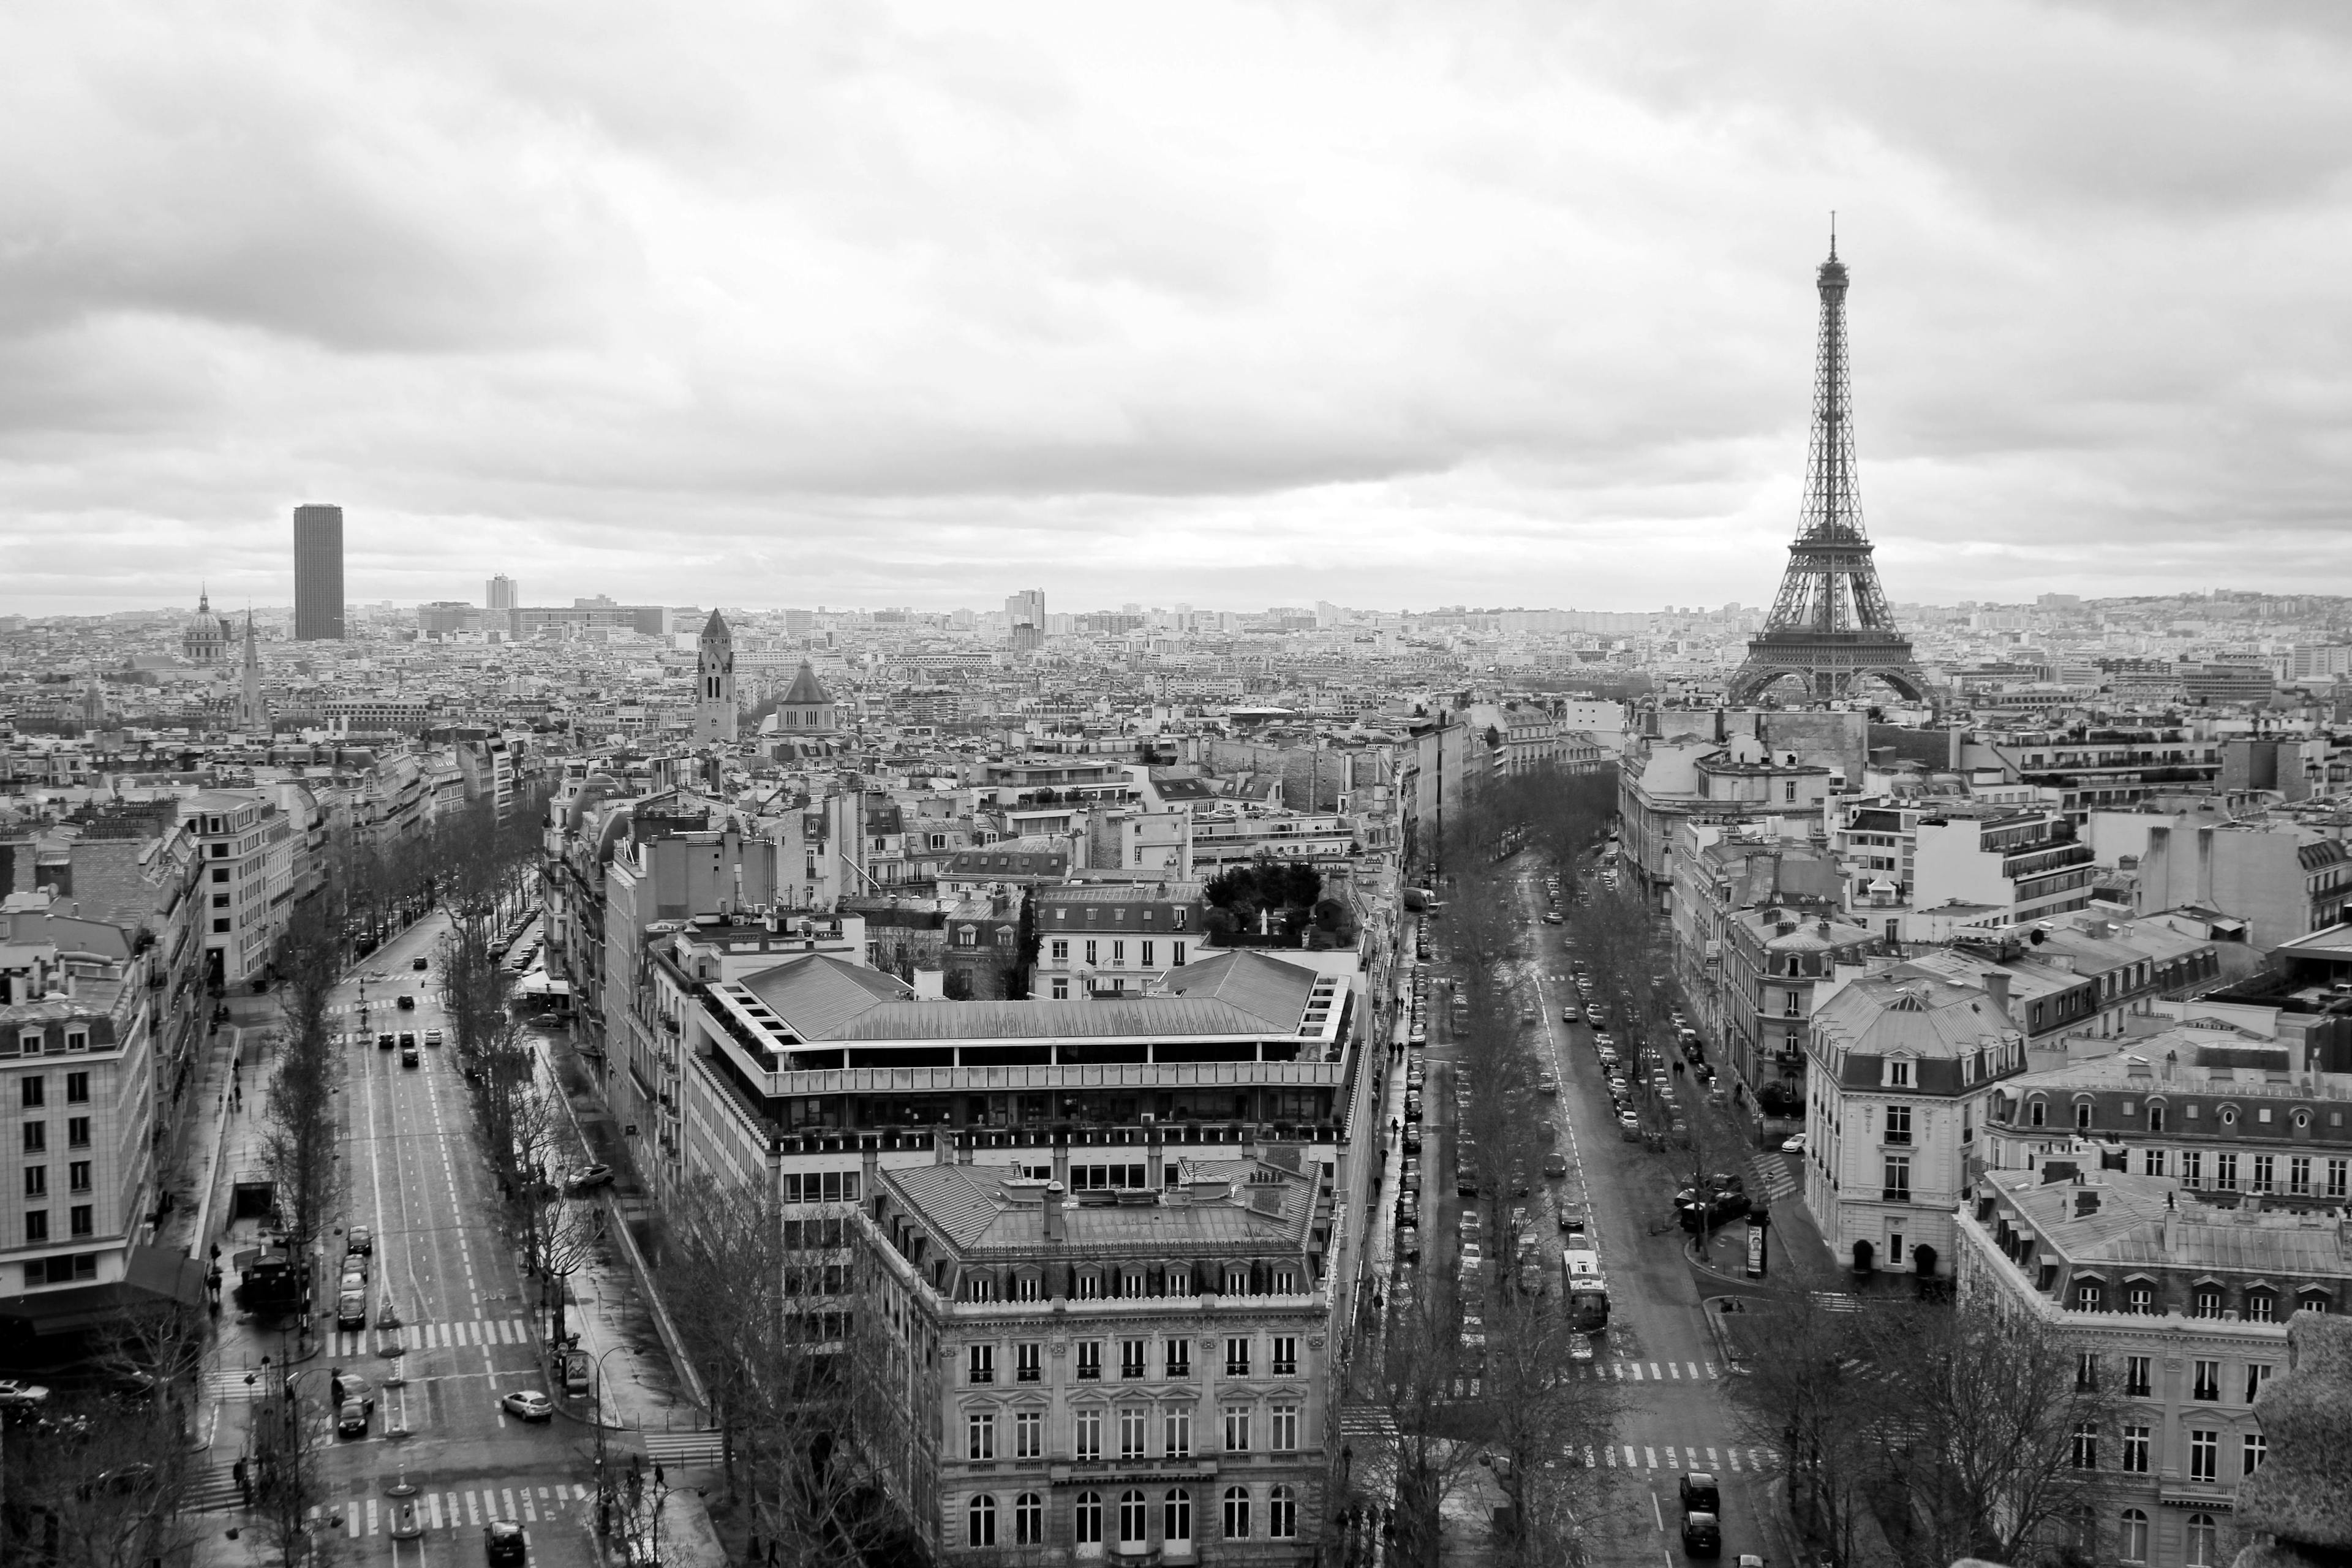 eiffel tower,sky,city life,city,roads,tourism,traveling,view,paris,showplace,street,buildings,france,black and white,europe,architecture,tower metropolis city urban intersection road spire tower cityscape outdoors office building